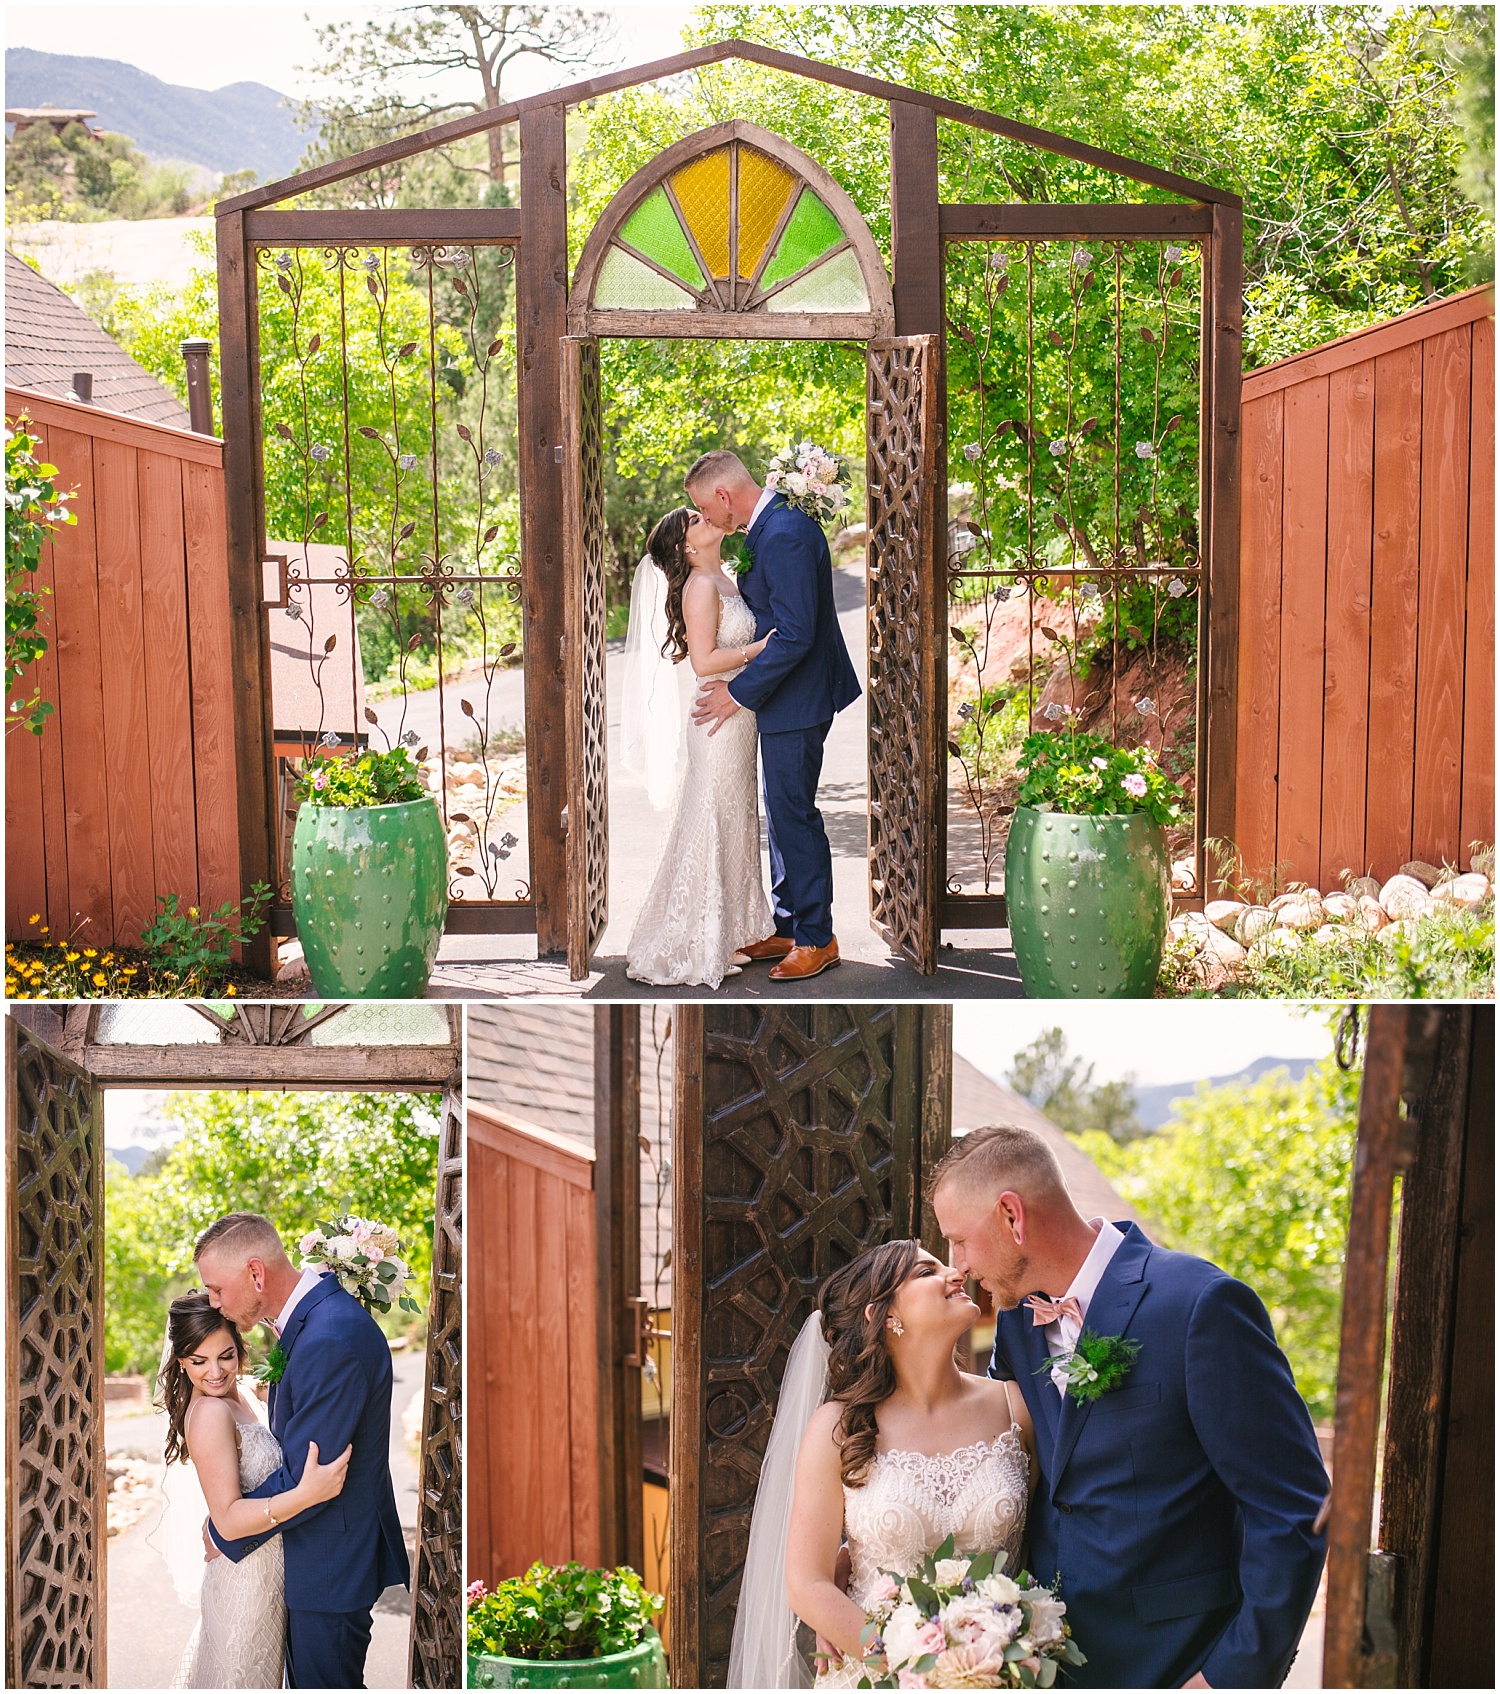 Bride and groom's portraits at iconic gate at Craftwood Inn in Manitou Springs